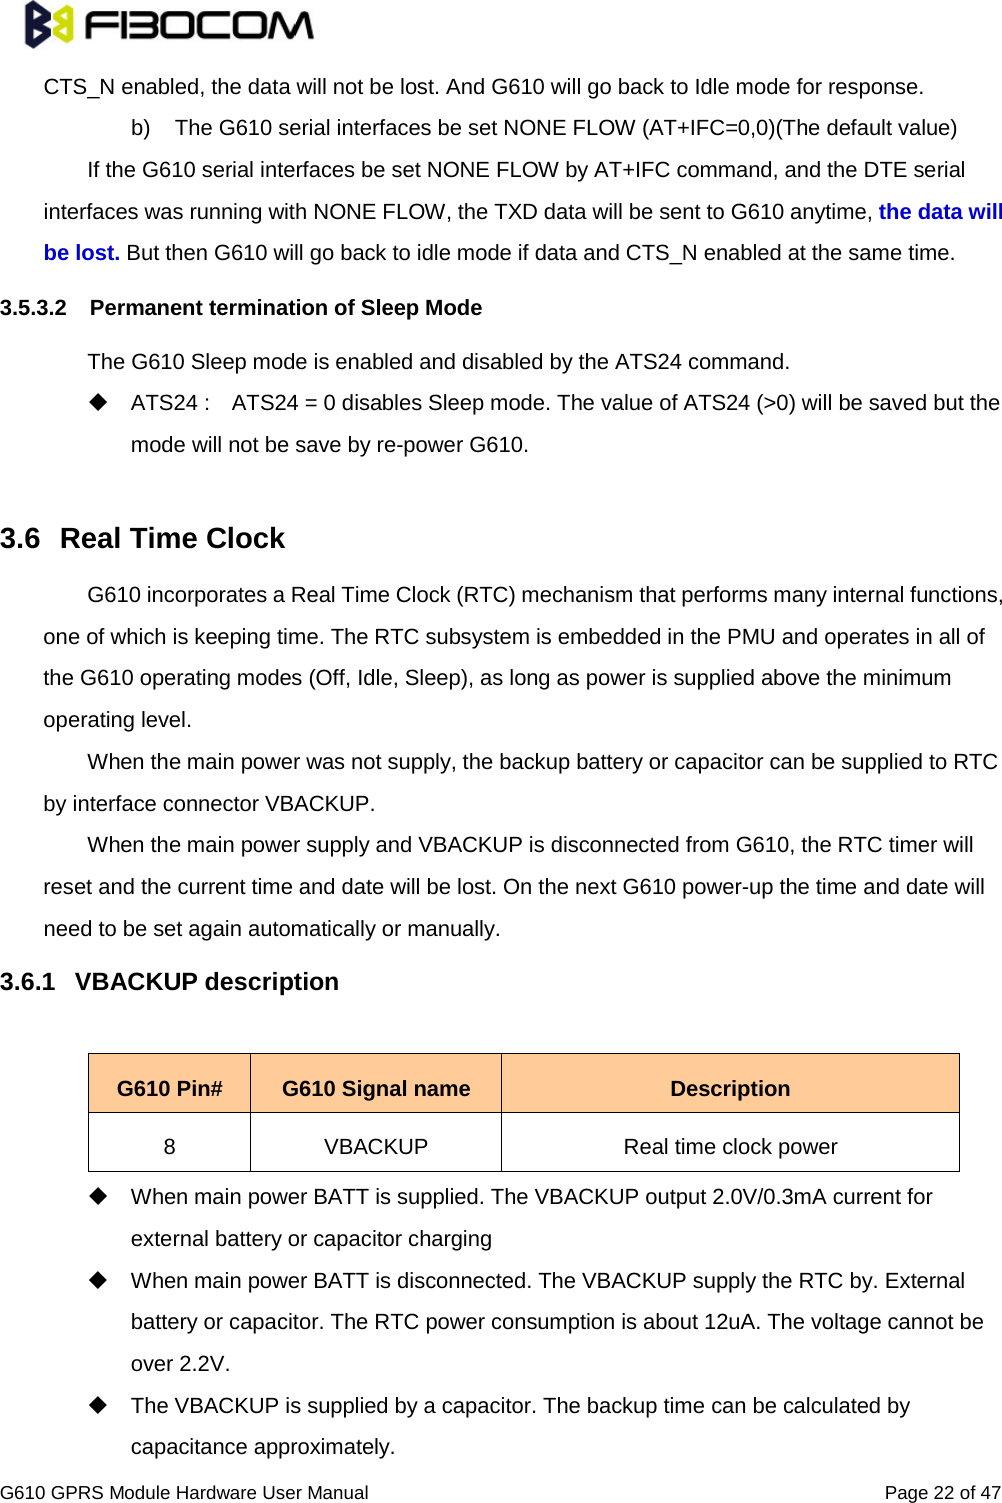                                                                                                          G610 GPRS Module Hardware User Manual                                                          Page 22 of 47  CTS_N enabled, the data will not be lost. And G610 will go back to Idle mode for response. b) The G610 serial interfaces be set NONE FLOW (AT+IFC=0,0)(The default value) If the G610 serial interfaces be set NONE FLOW by AT+IFC command, and the DTE serial interfaces was running with NONE FLOW, the TXD data will be sent to G610 anytime, the data will be lost. But then G610 will go back to idle mode if data and CTS_N enabled at the same time. 3.5.3.2 Permanent termination of Sleep Mode   The G610 Sleep mode is enabled and disabled by the ATS24 command.    ATS24 :    ATS24 = 0 disables Sleep mode. The value of ATS24 (&gt;0) will be saved but the mode will not be save by re-power G610.  3.6 Real Time Clock   G610 incorporates a Real Time Clock (RTC) mechanism that performs many internal functions, one of which is keeping time. The RTC subsystem is embedded in the PMU and operates in all of the G610 operating modes (Off, Idle, Sleep), as long as power is supplied above the minimum operating level.   When the main power was not supply, the backup battery or capacitor can be supplied to RTC by interface connector VBACKUP.   When the main power supply and VBACKUP is disconnected from G610, the RTC timer will reset and the current time and date will be lost. On the next G610 power-up the time and date will need to be set again automatically or manually. 3.6.1 VBACKUP description  G610 Pin# G610 Signal name Description 8 VBACKUP Real time clock power  When main power BATT is supplied. The VBACKUP output 2.0V/0.3mA current for external battery or capacitor charging  When main power BATT is disconnected. The VBACKUP supply the RTC by. External battery or capacitor. The RTC power consumption is about 12uA. The voltage cannot be over 2.2V.  The VBACKUP is supplied by a capacitor. The backup time can be calculated by capacitance approximately.   